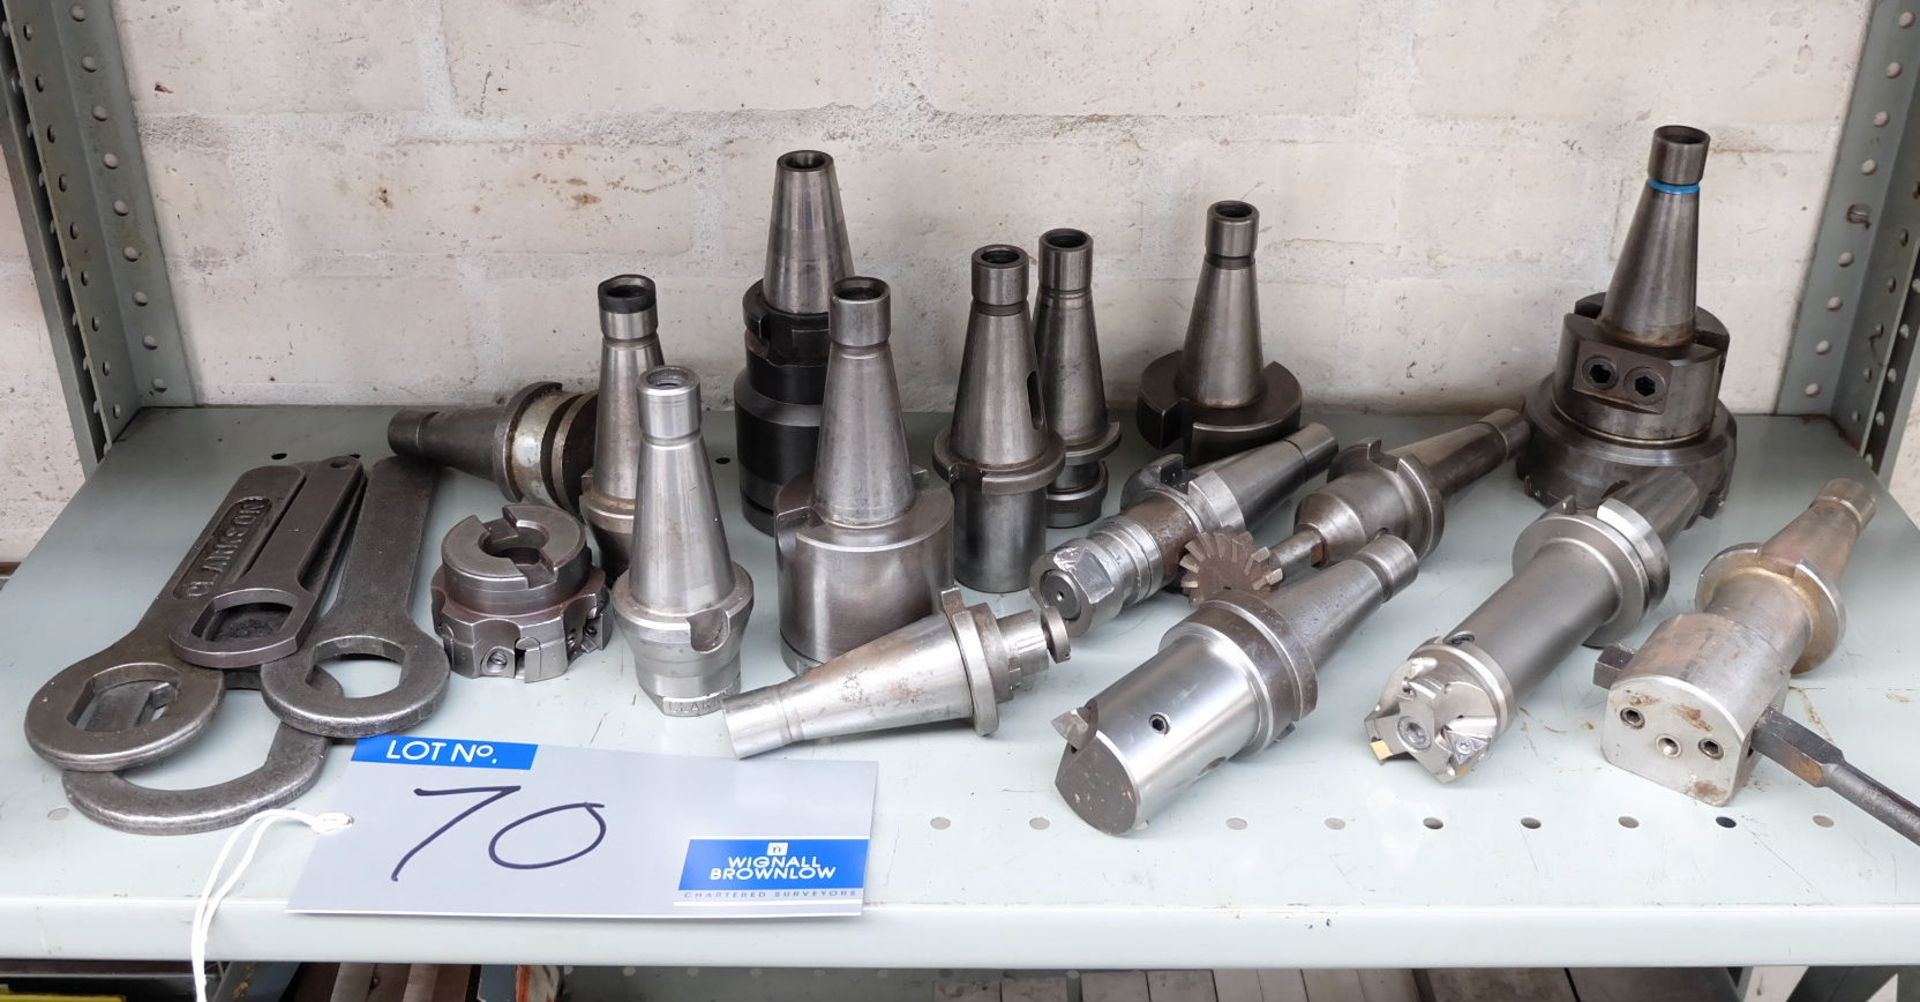 A Quantity of Assorted Milling Machine Spindle Tooling.